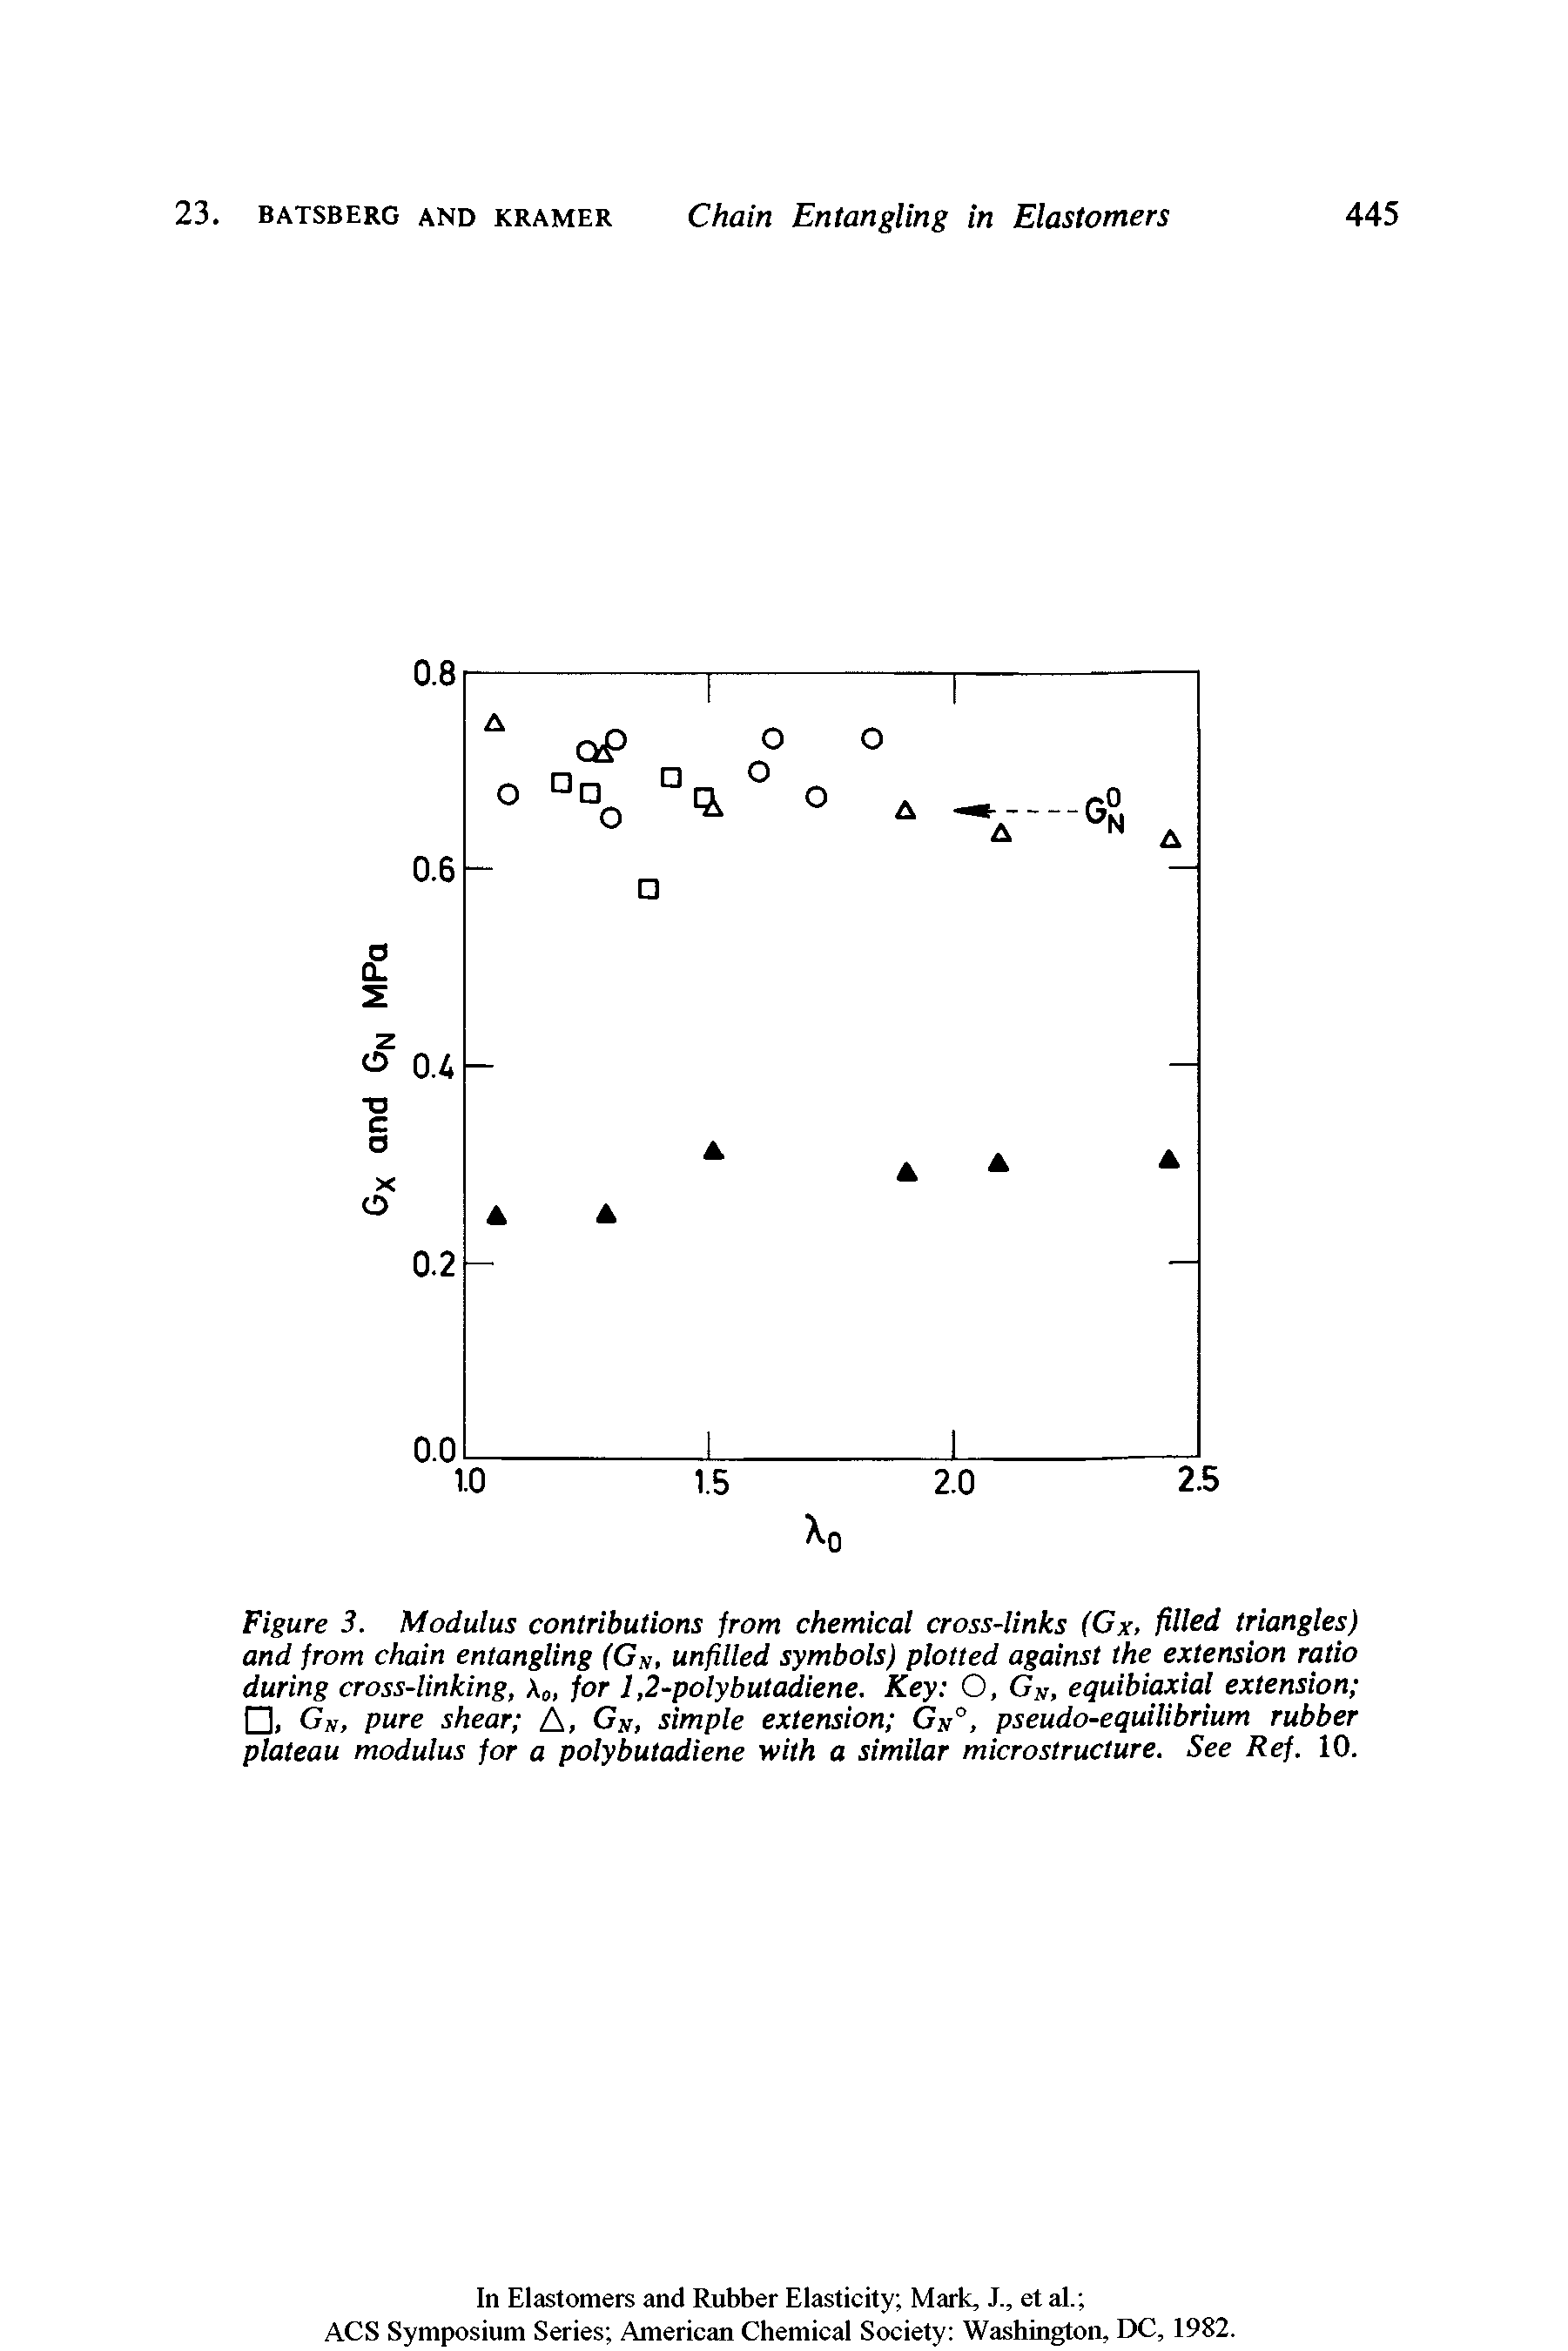 Figure 3. Modulus contributions from chemical cross-links (Cx, filled triangles) and from chain entangling (Gx, unfilled symbols) plotted against the extension ratio during cross-linking, A0, for 1,2-polybutadiene. Key O, GN, equibiaxial extension , G.v, pure shear A, Gx, simple extension Gx°, pseudo-equilibrium rubber plateau modulus for a polybutadiene with a similar microstructure. See Ref. 10.